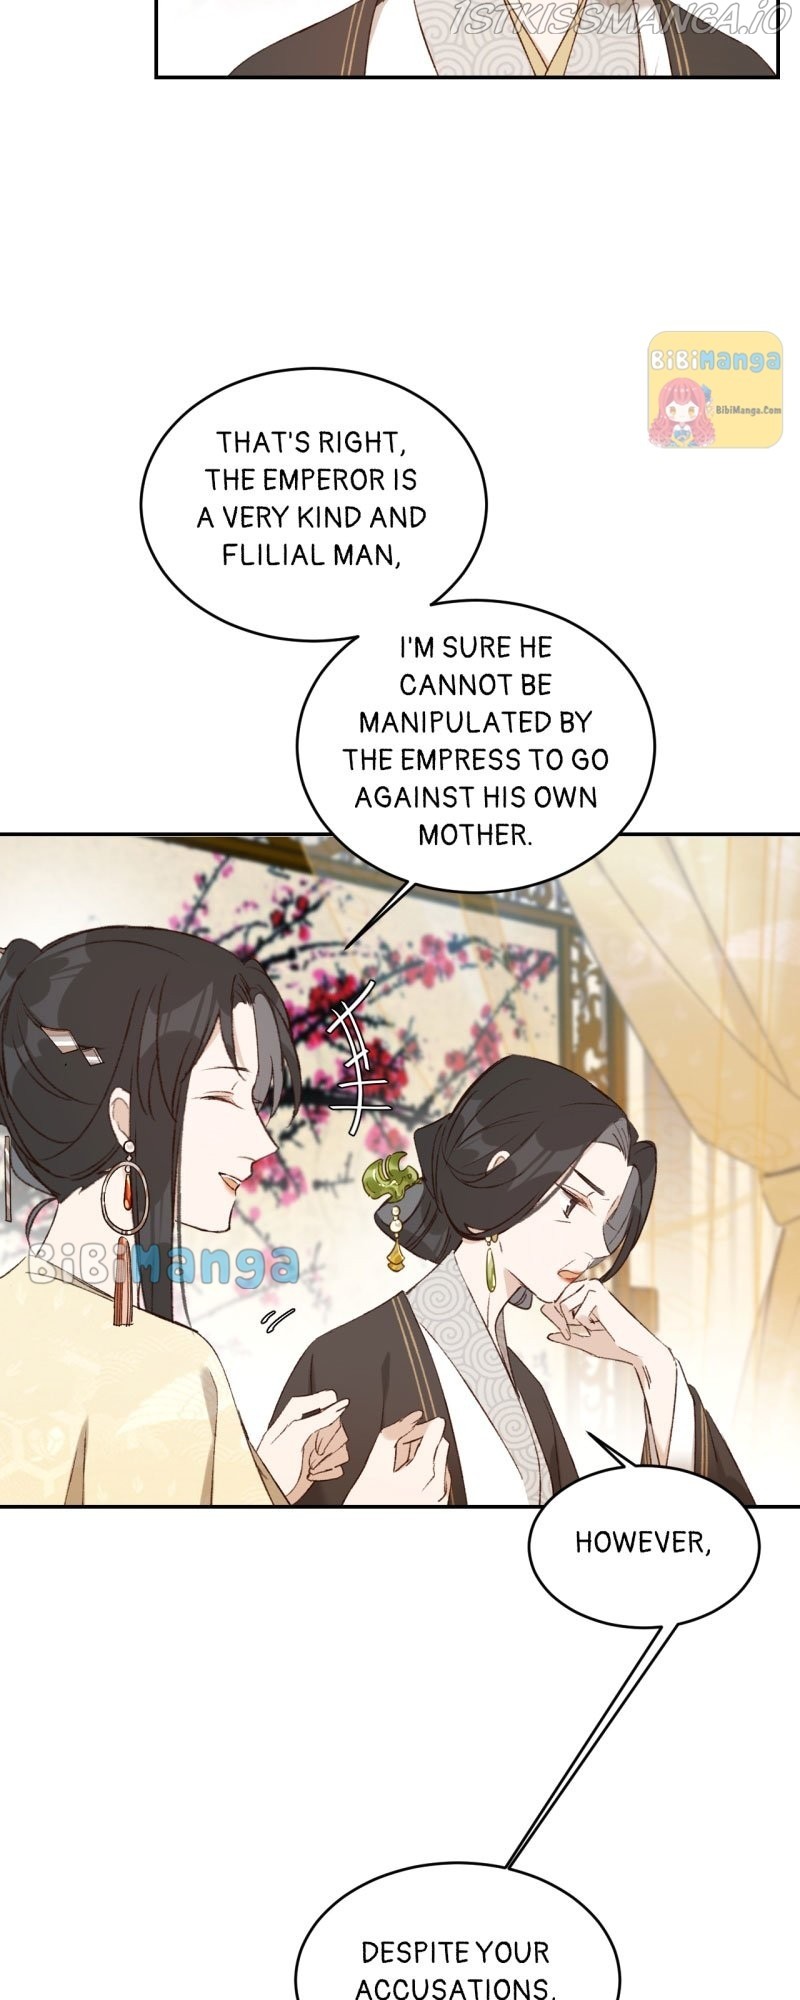 The Empress With No Virtue - Page 3